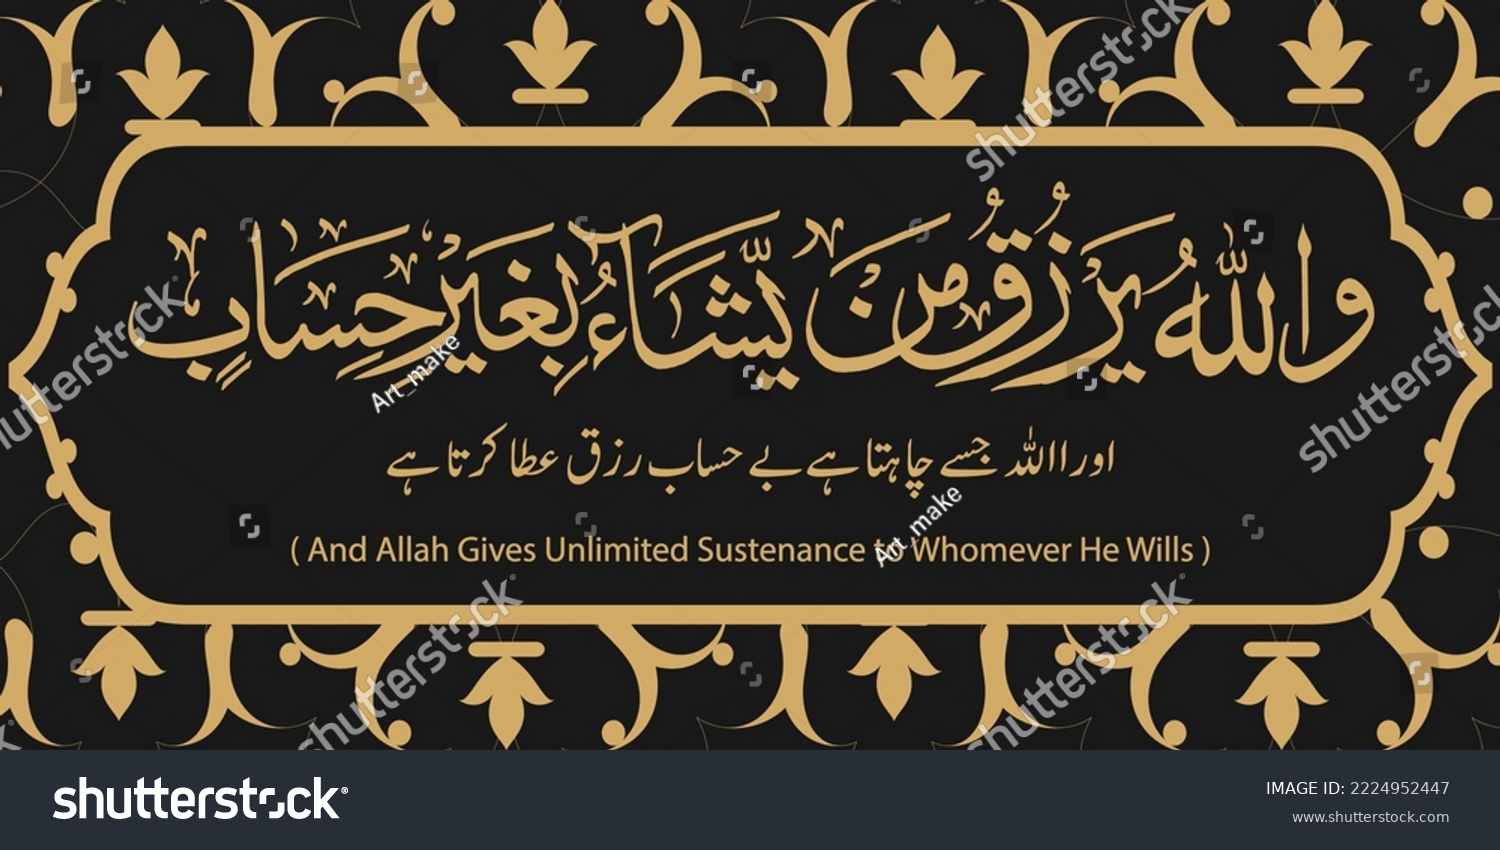 SVG of Arabic calligraphy from Holy Quran.